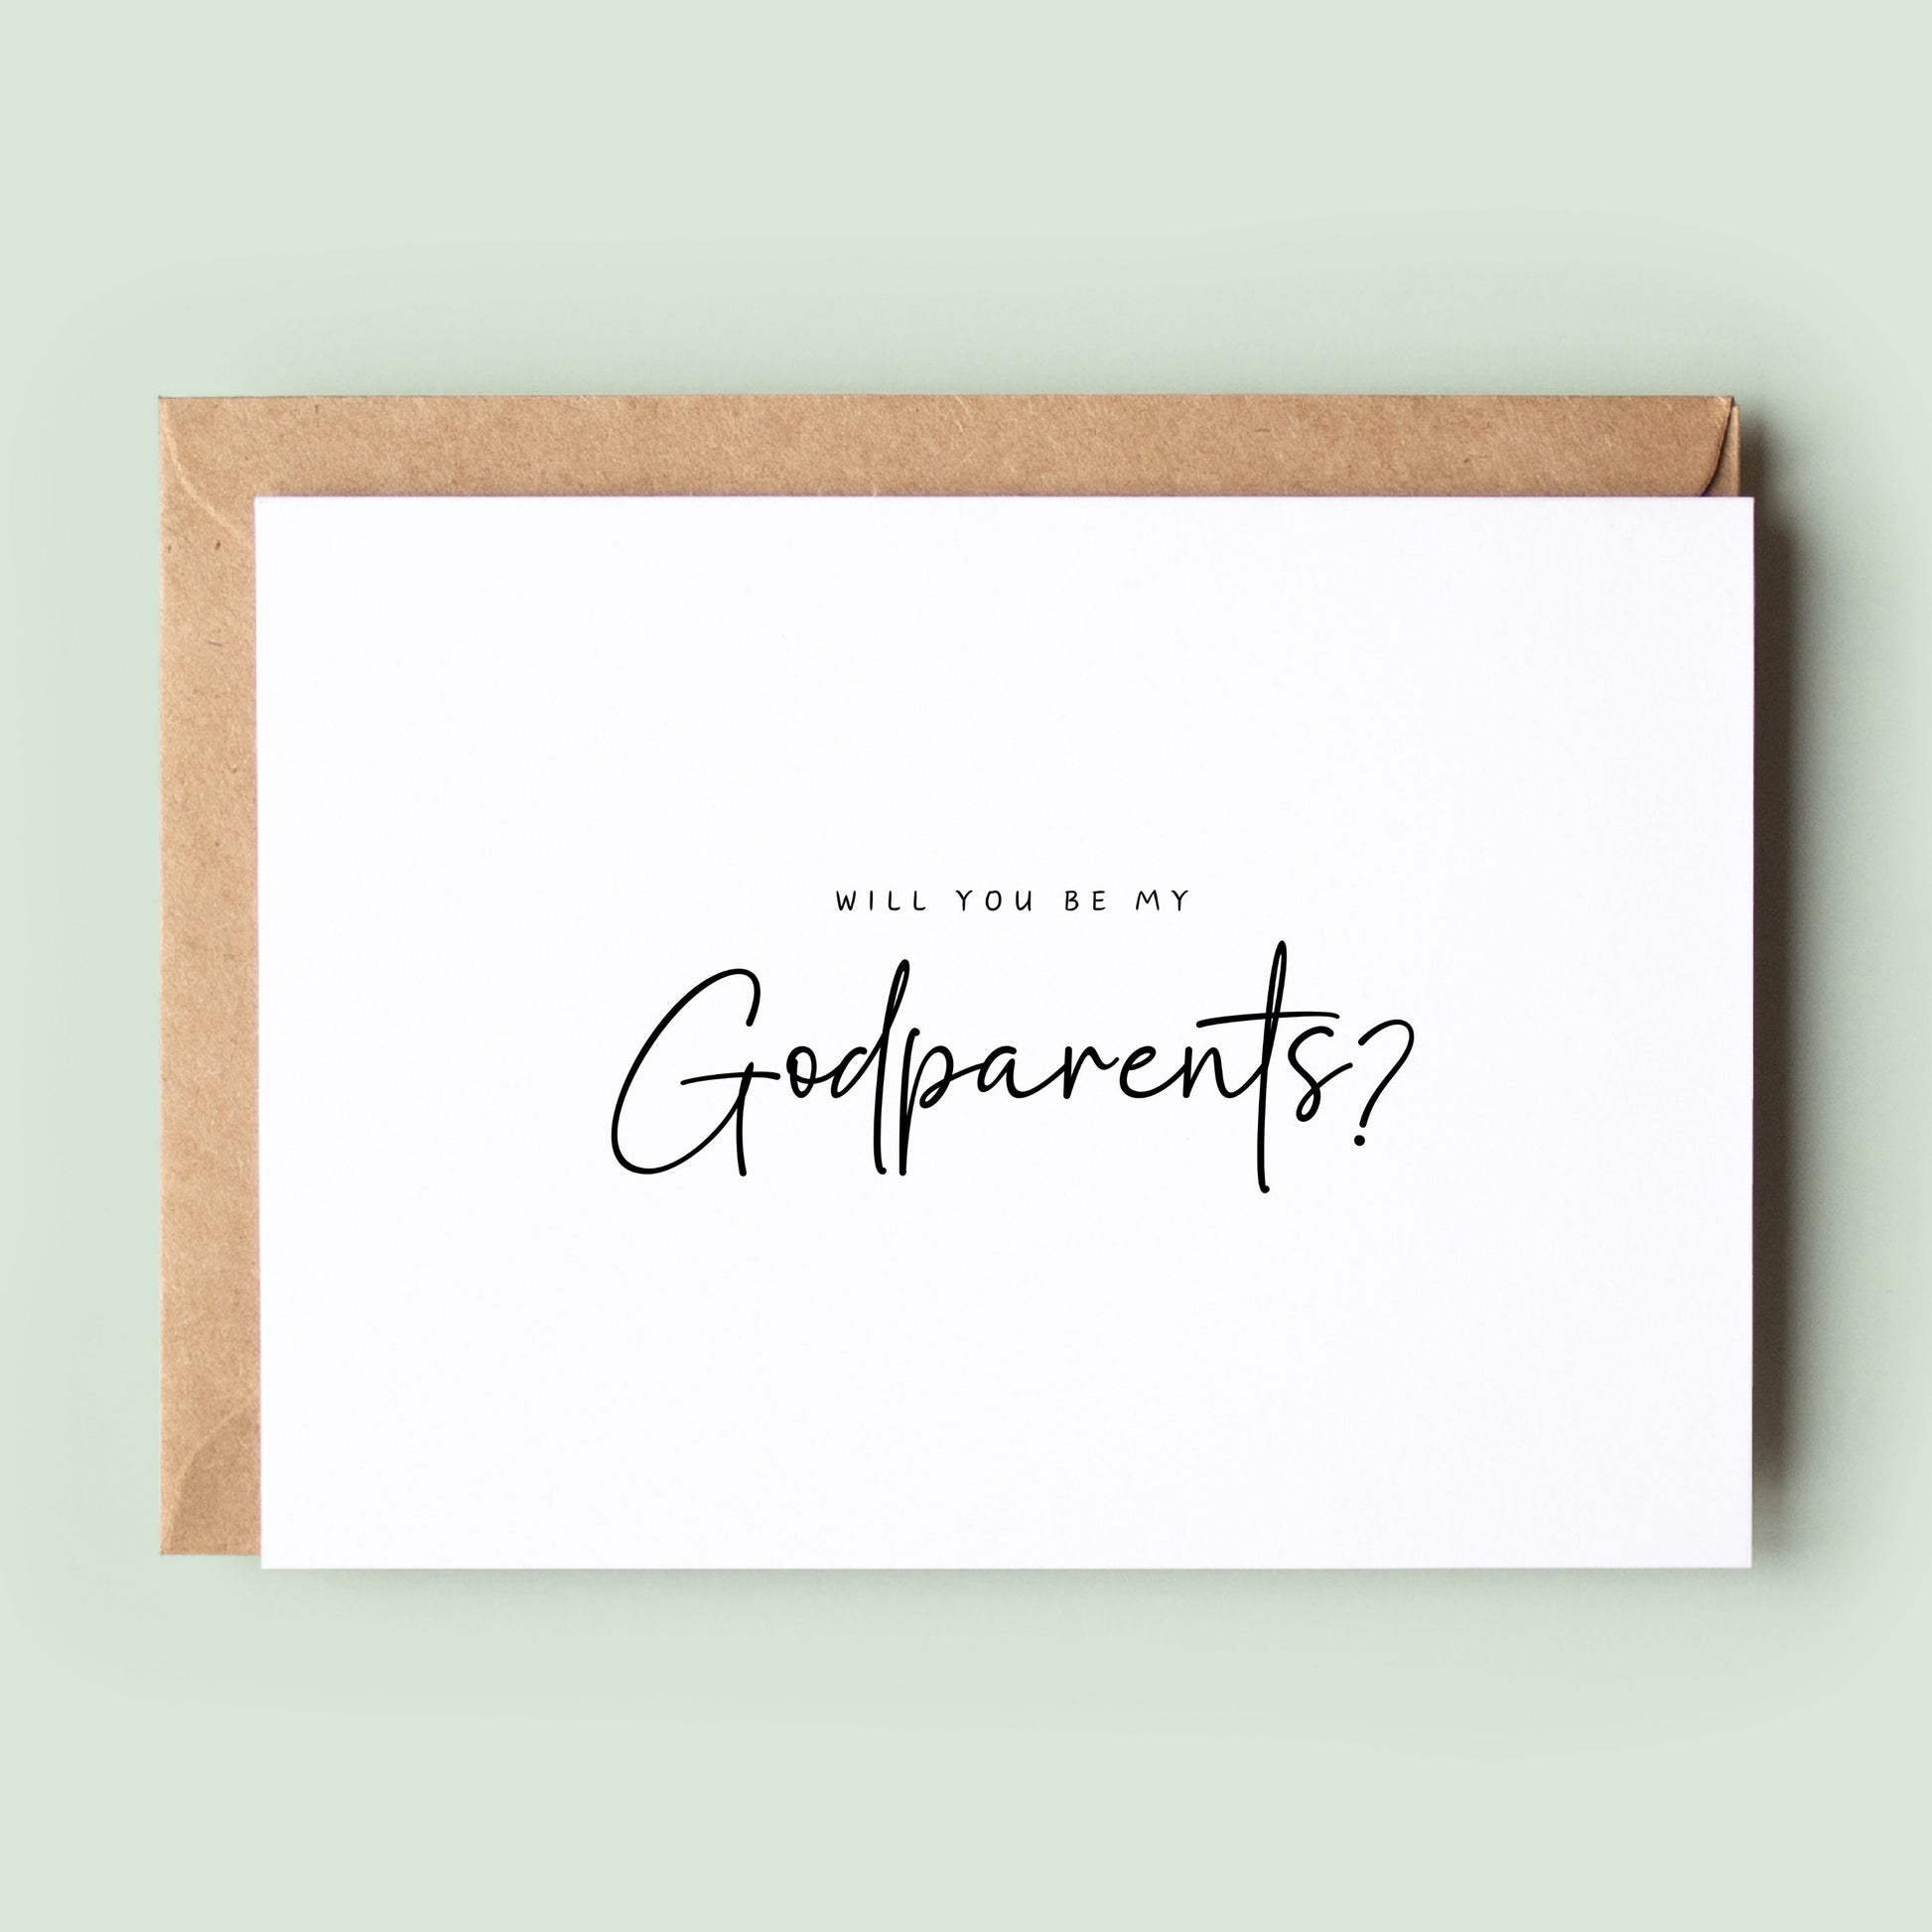 Simple Will You Be My Godfather Card, God Father Proposal Card, God Parent Card, Christening Gift, Baptism Gift, Godparent Asking Card #142